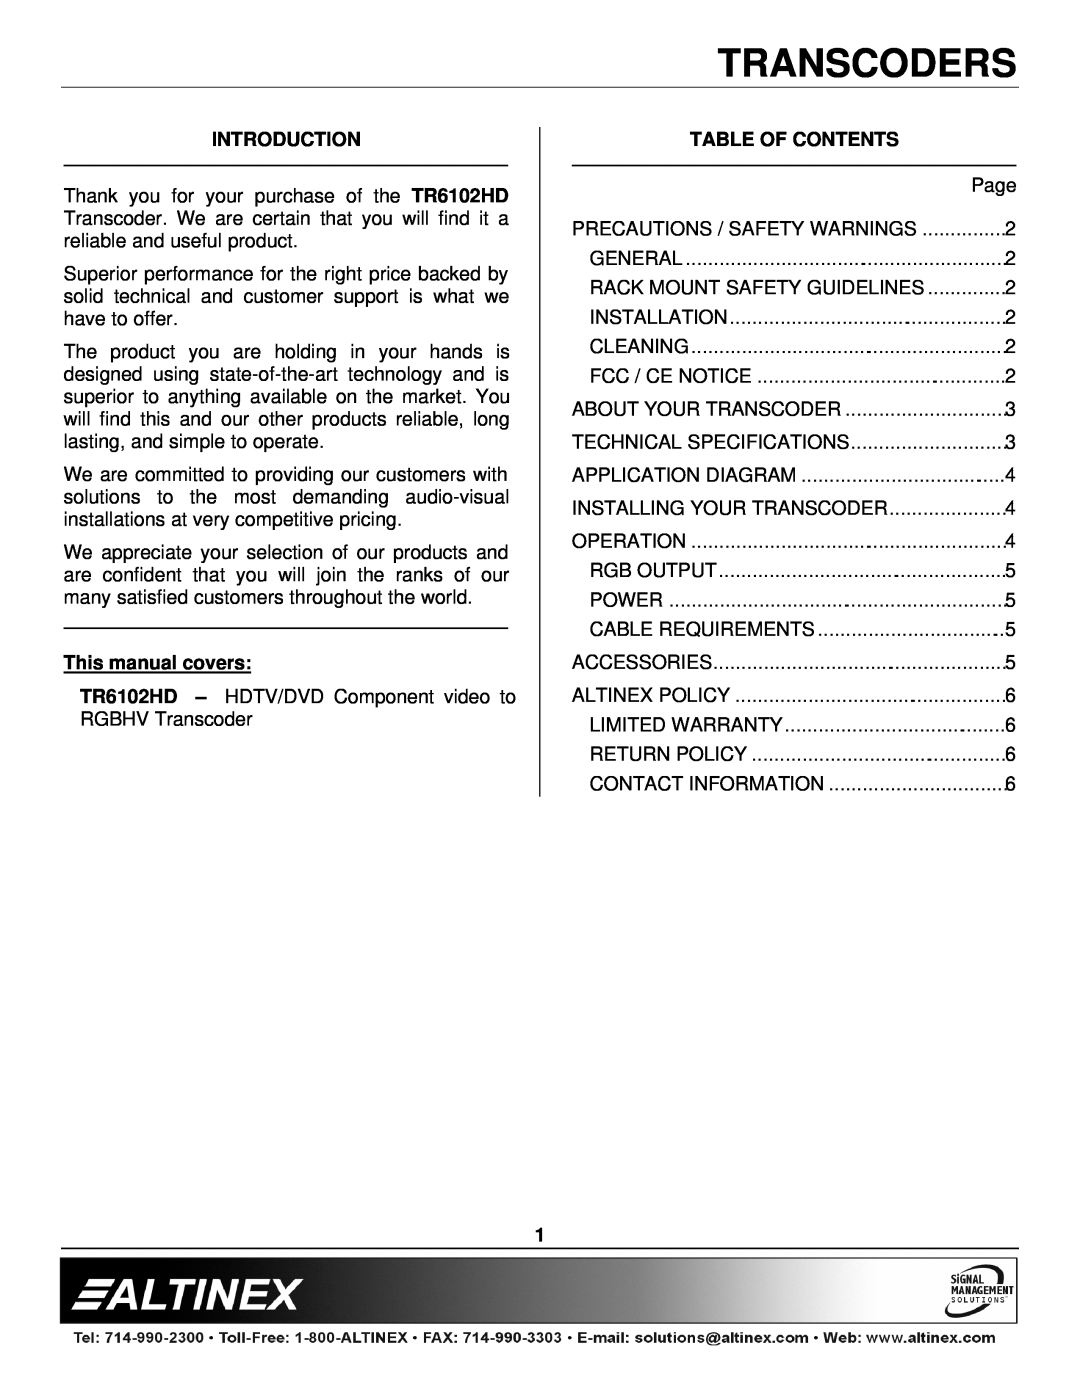 Altinex TR6102HD Introduction, This manual covers, Table Of Contents, Transcoders 